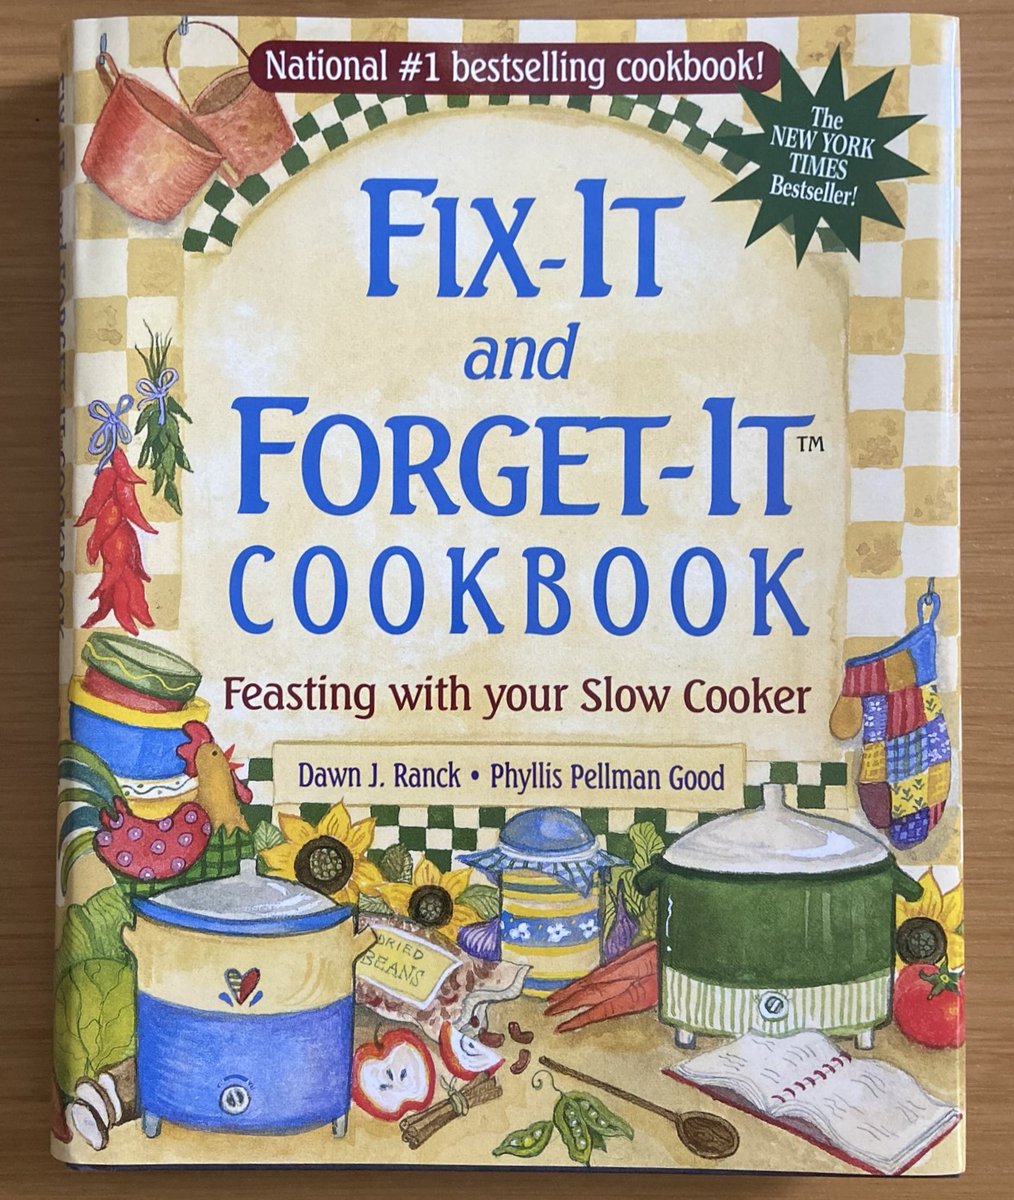 🍴Check out Fix-It and Forget-It Cookbook: Feasting with Your Slow Cooker #recipes #comfortfood #onepot #crockpot #cookbooks #familyfavorites ebay.com/itm/1667523729… #eBay via @eBay